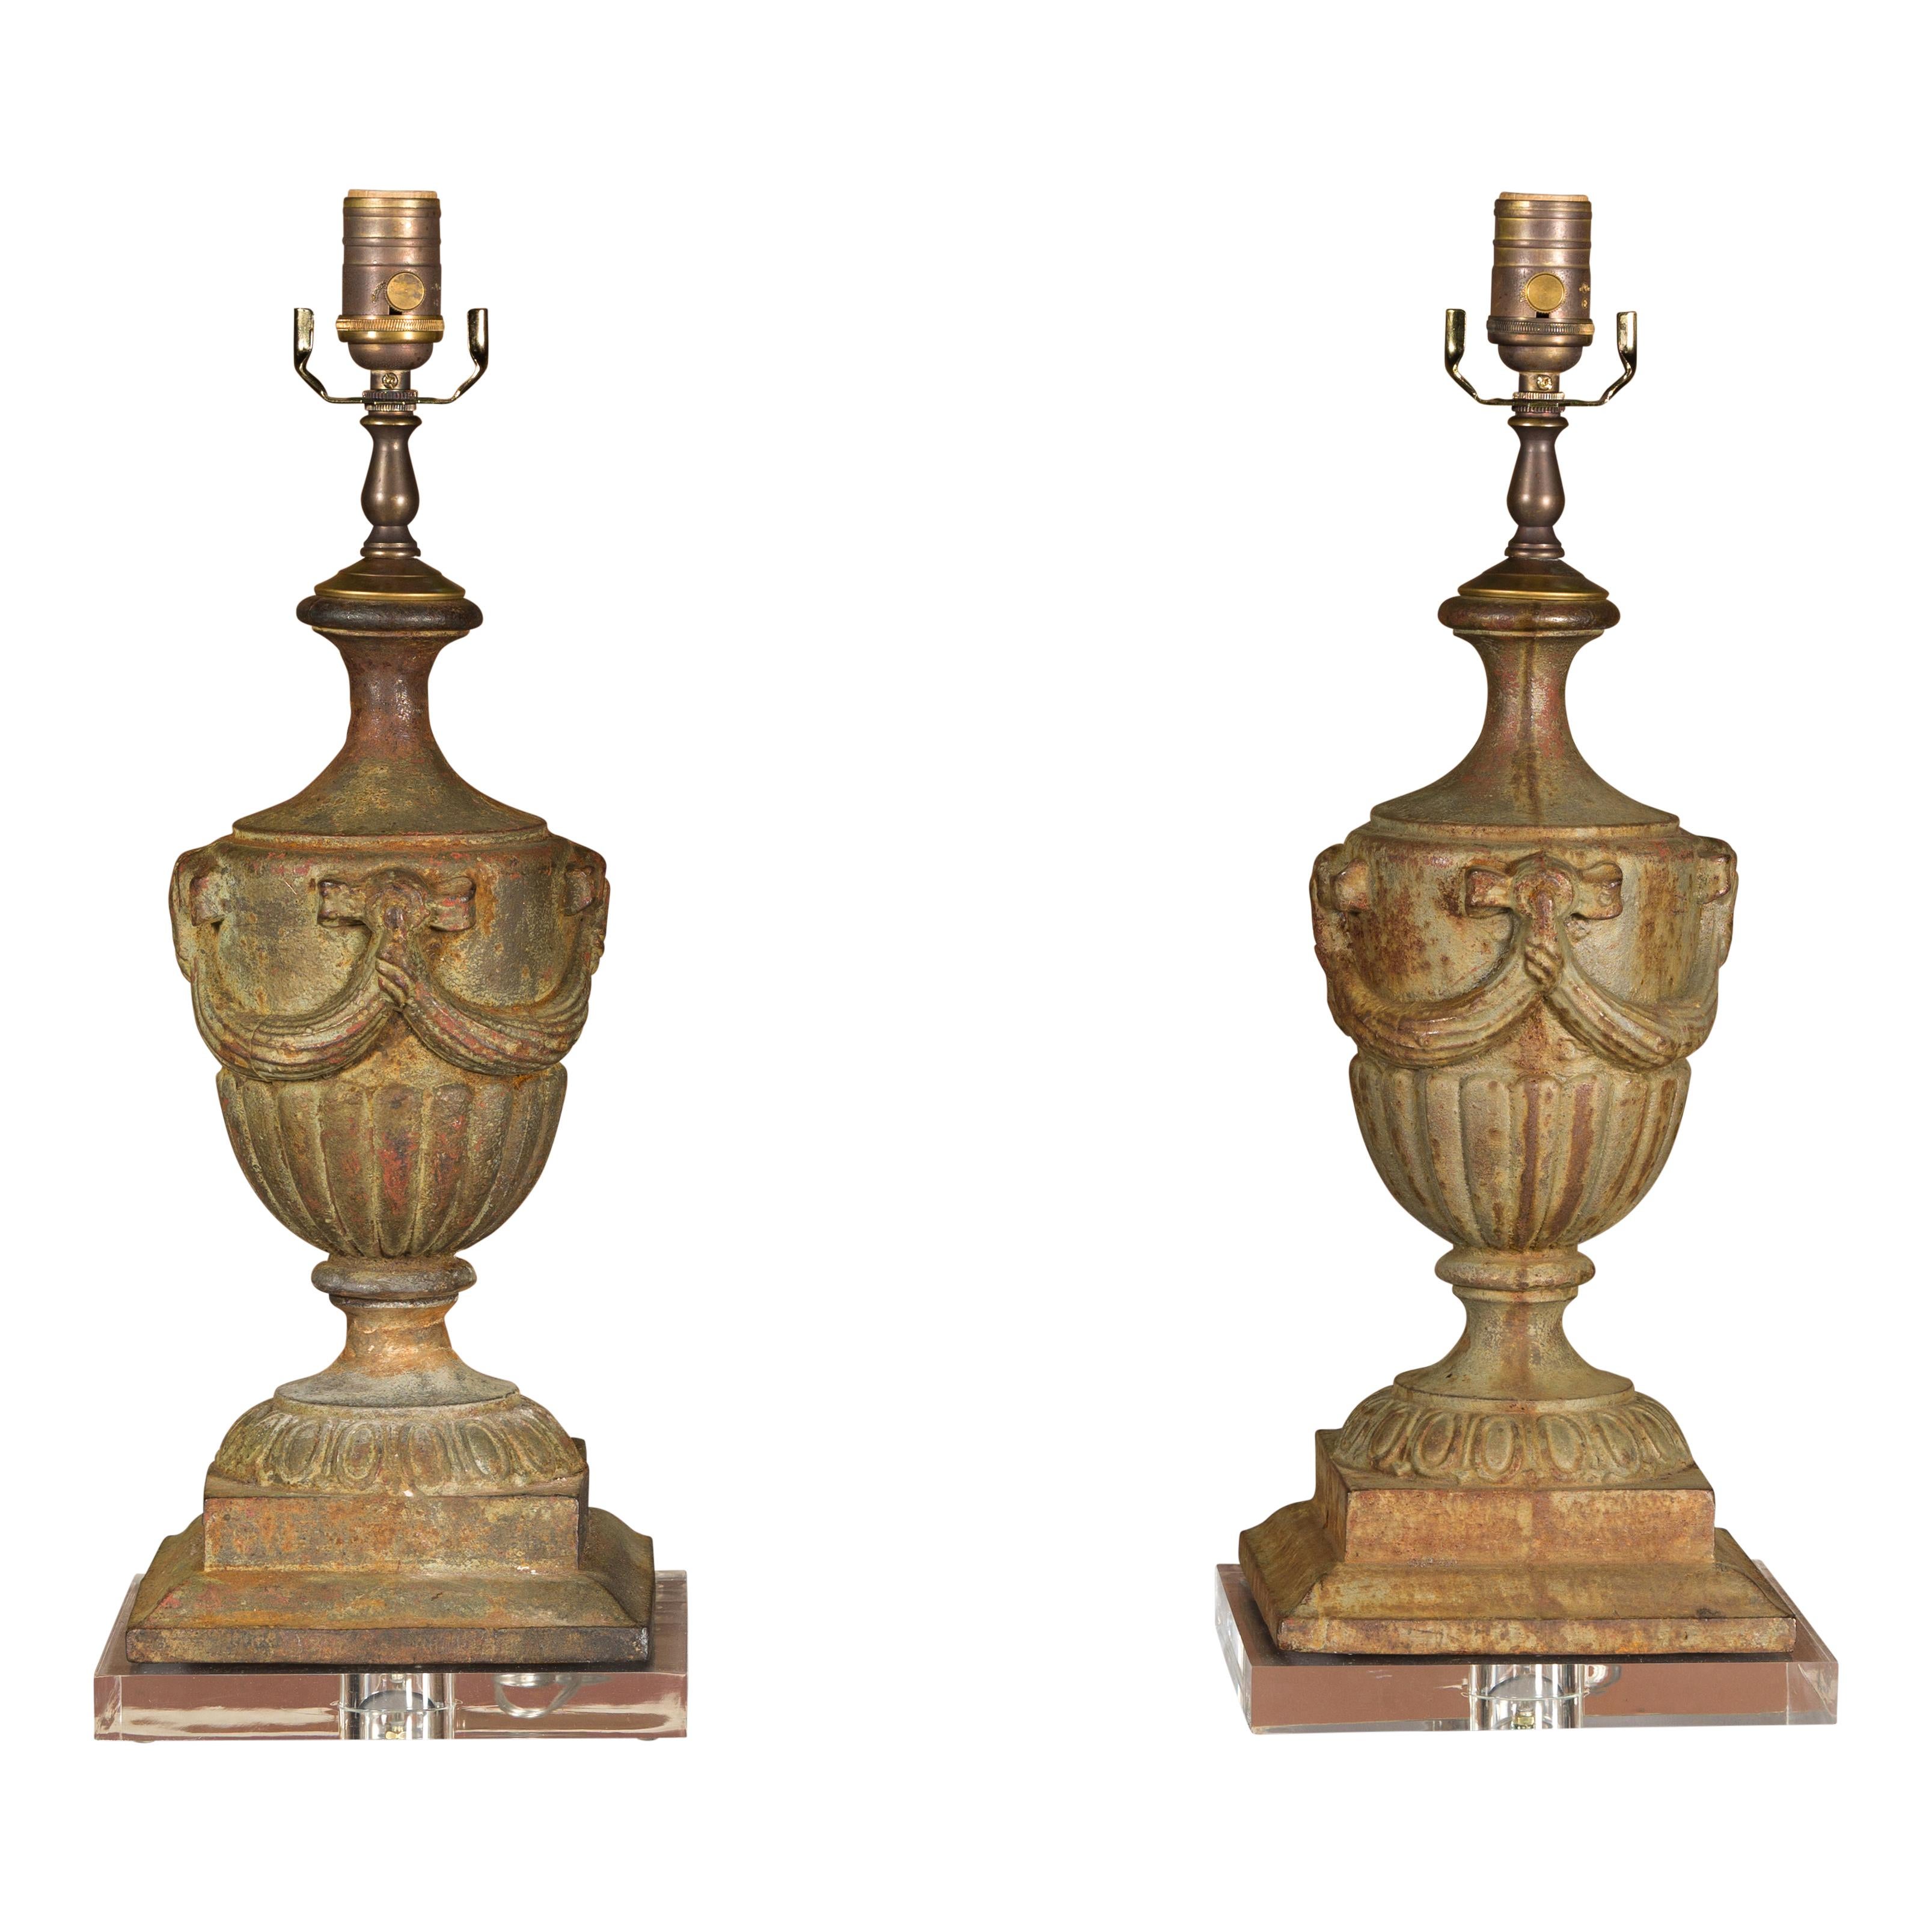 Neoclassical Style Midcentury Iron Table Lamps on Lucite Bases, a Pair For Sale 11